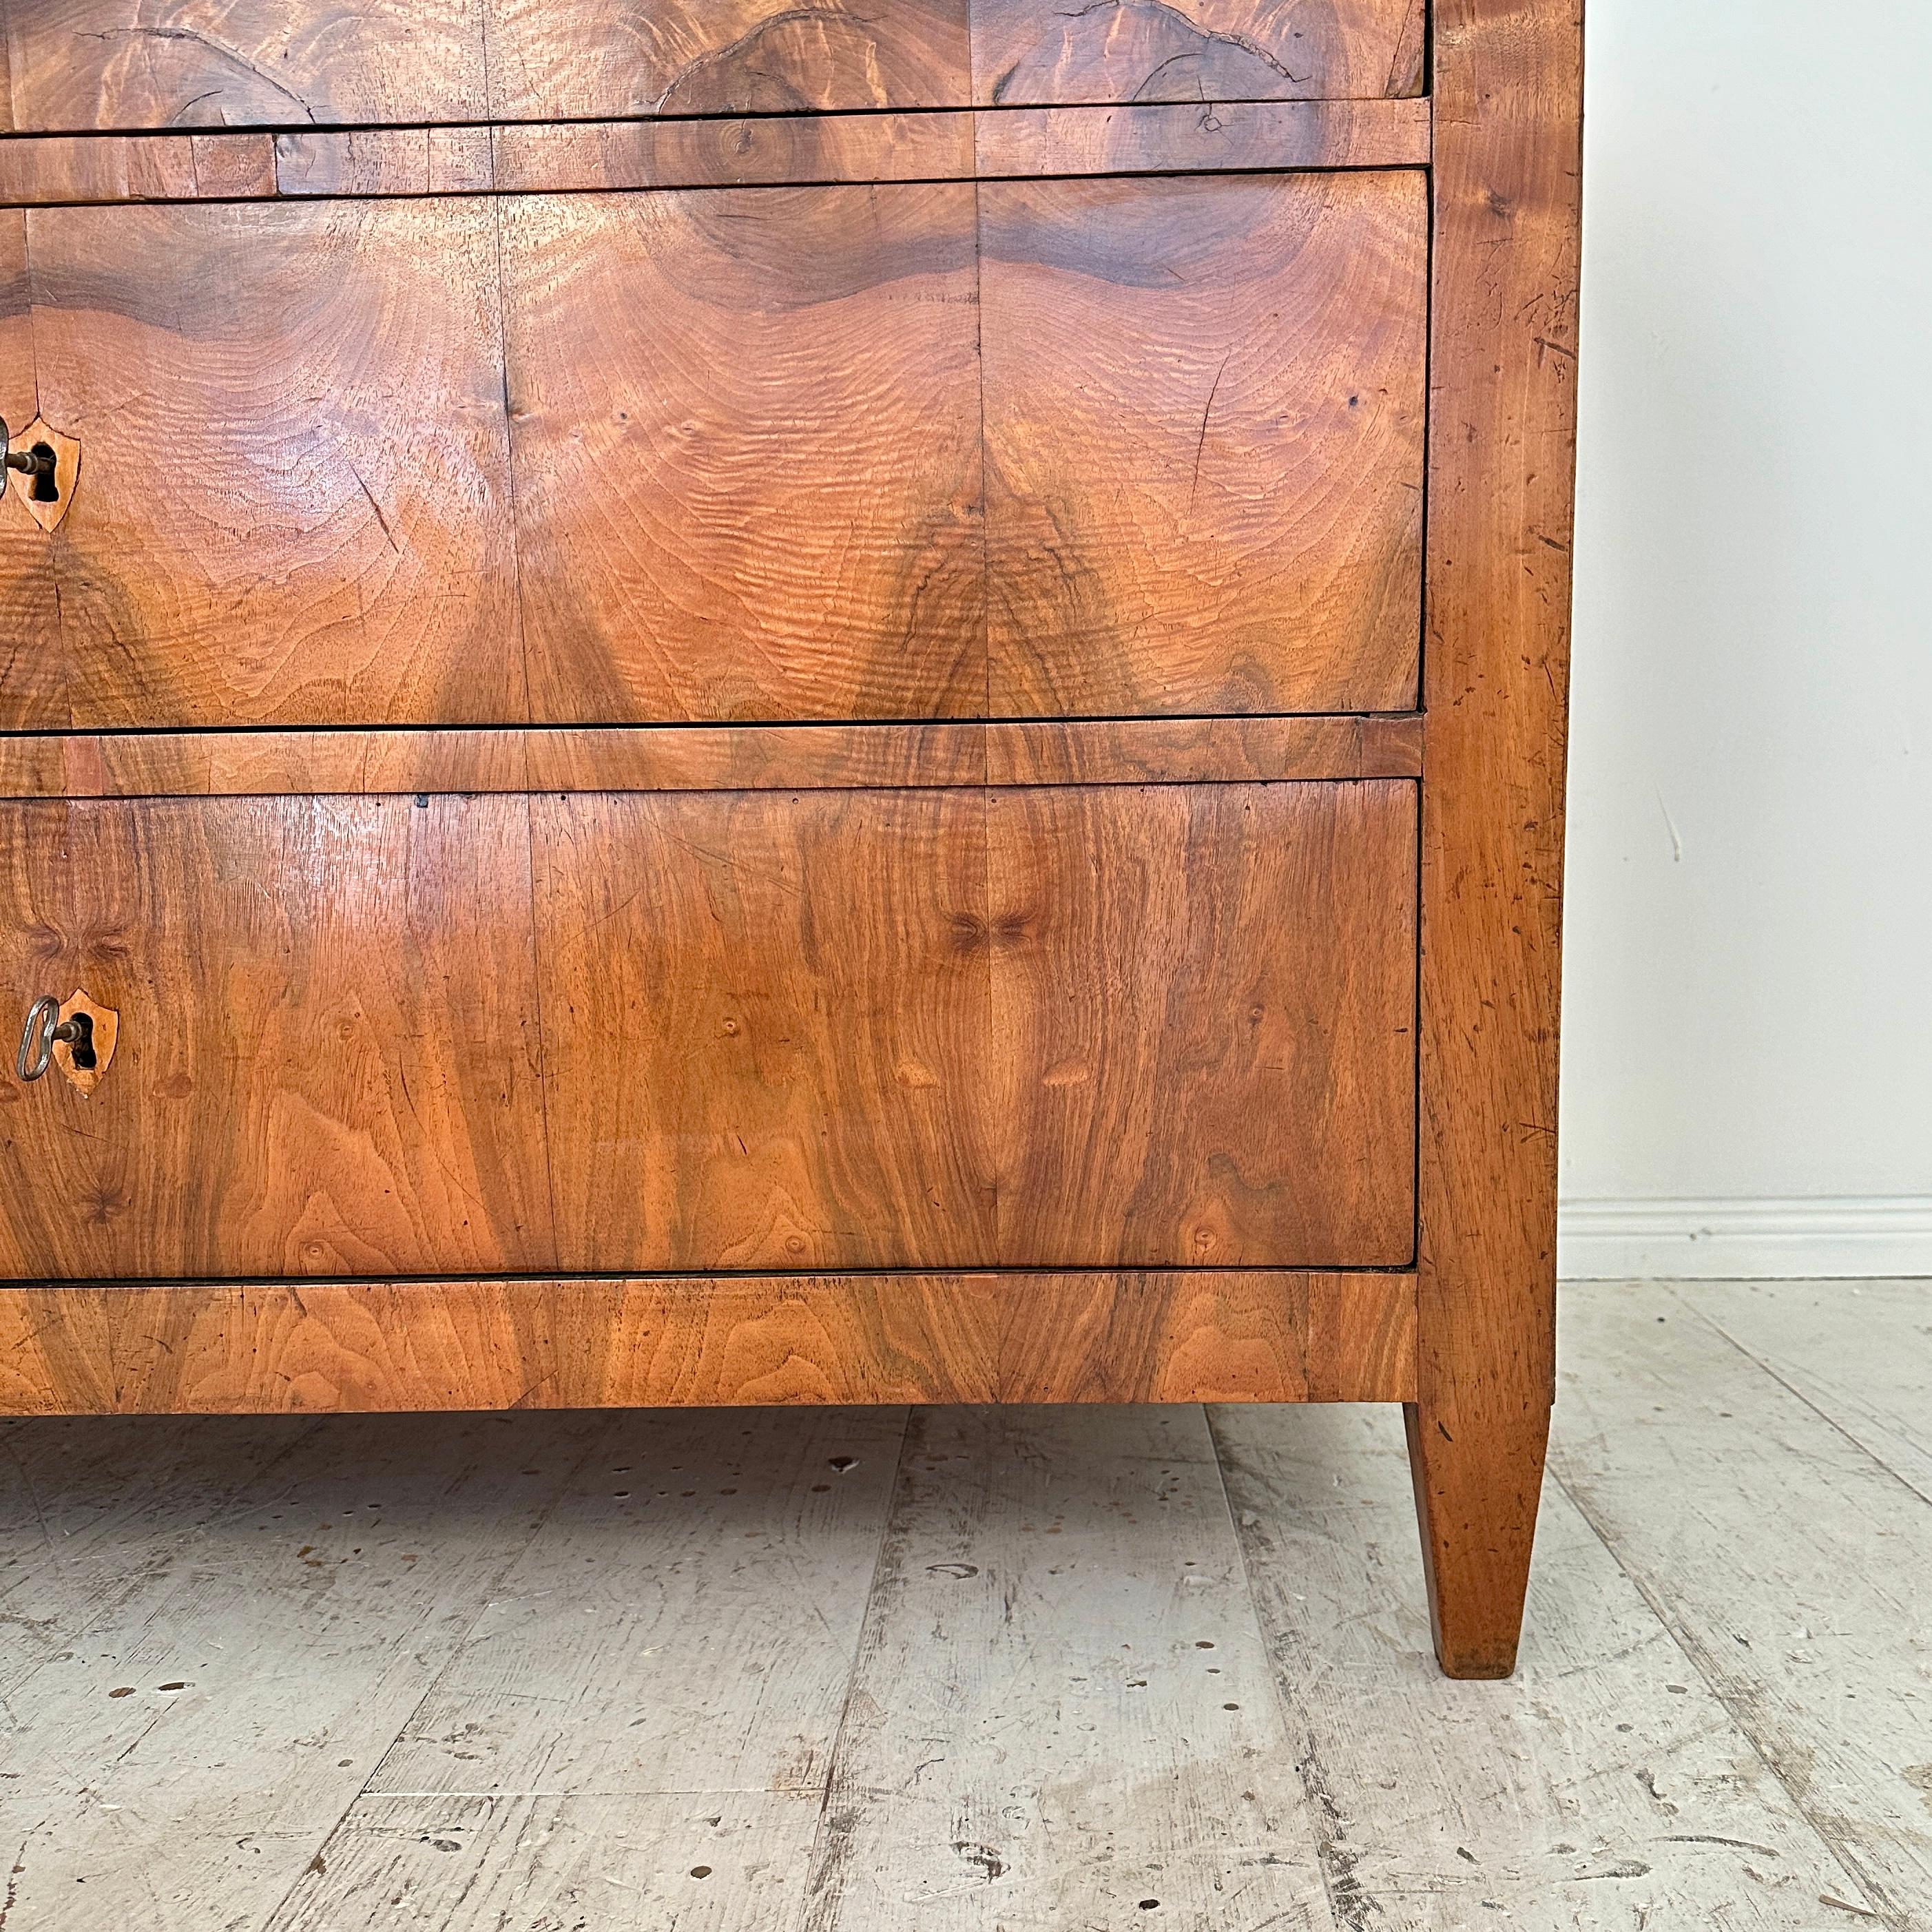 19th Century German Biedermeier Chest of Drawers in Walnut with 3 Drawers, 1820 For Sale 4